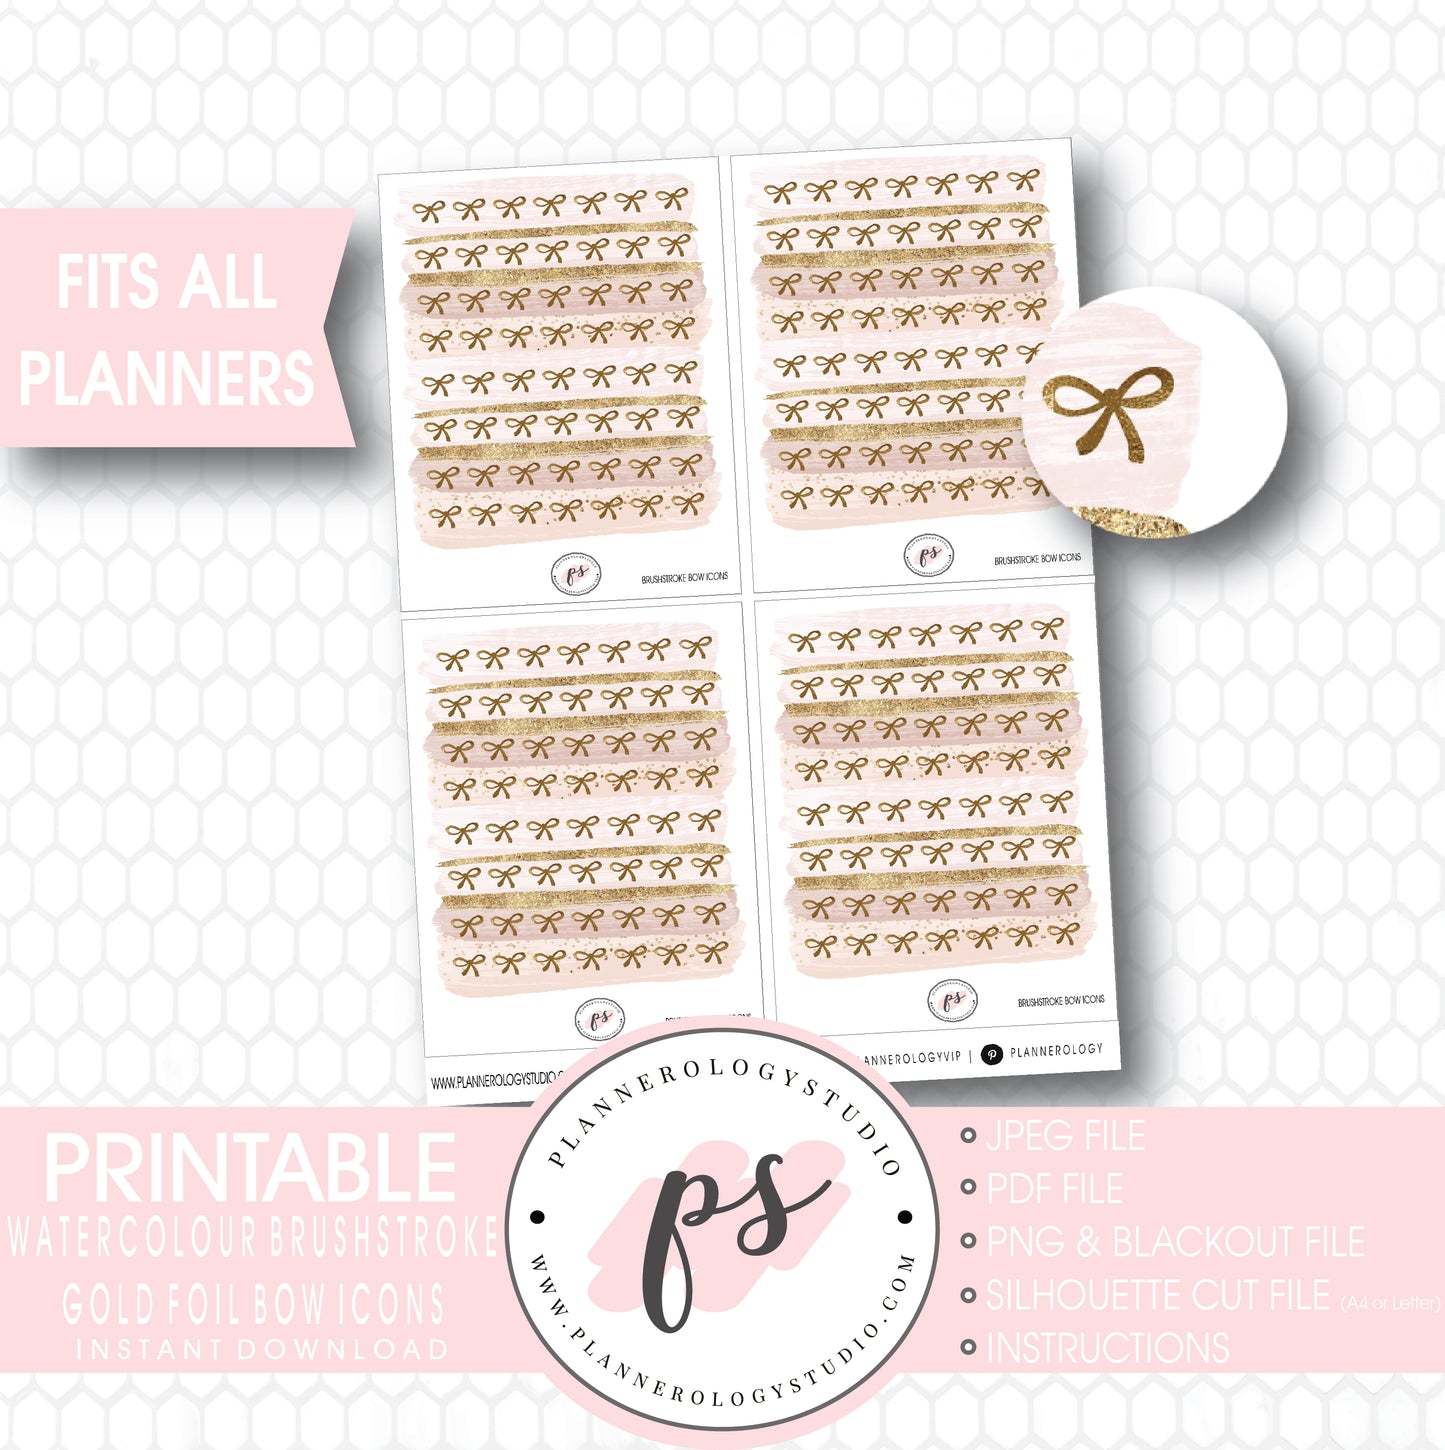 Watercolour Brushstroke Gold Foil Texture Bow Icons Digital Printable Planner Stickers - Plannerologystudio